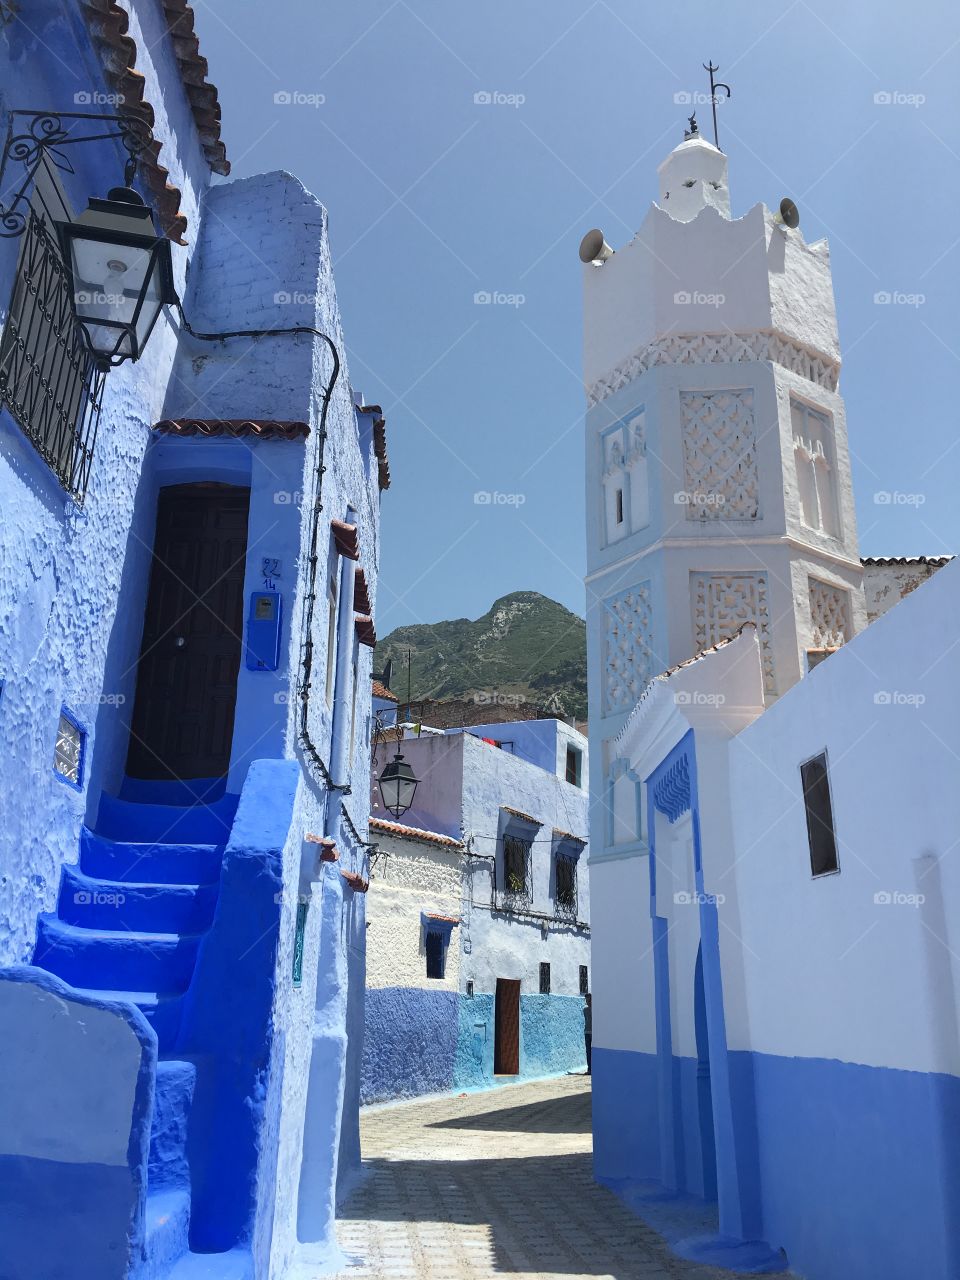 The Blue City Of Chefchaouen, Morocco 